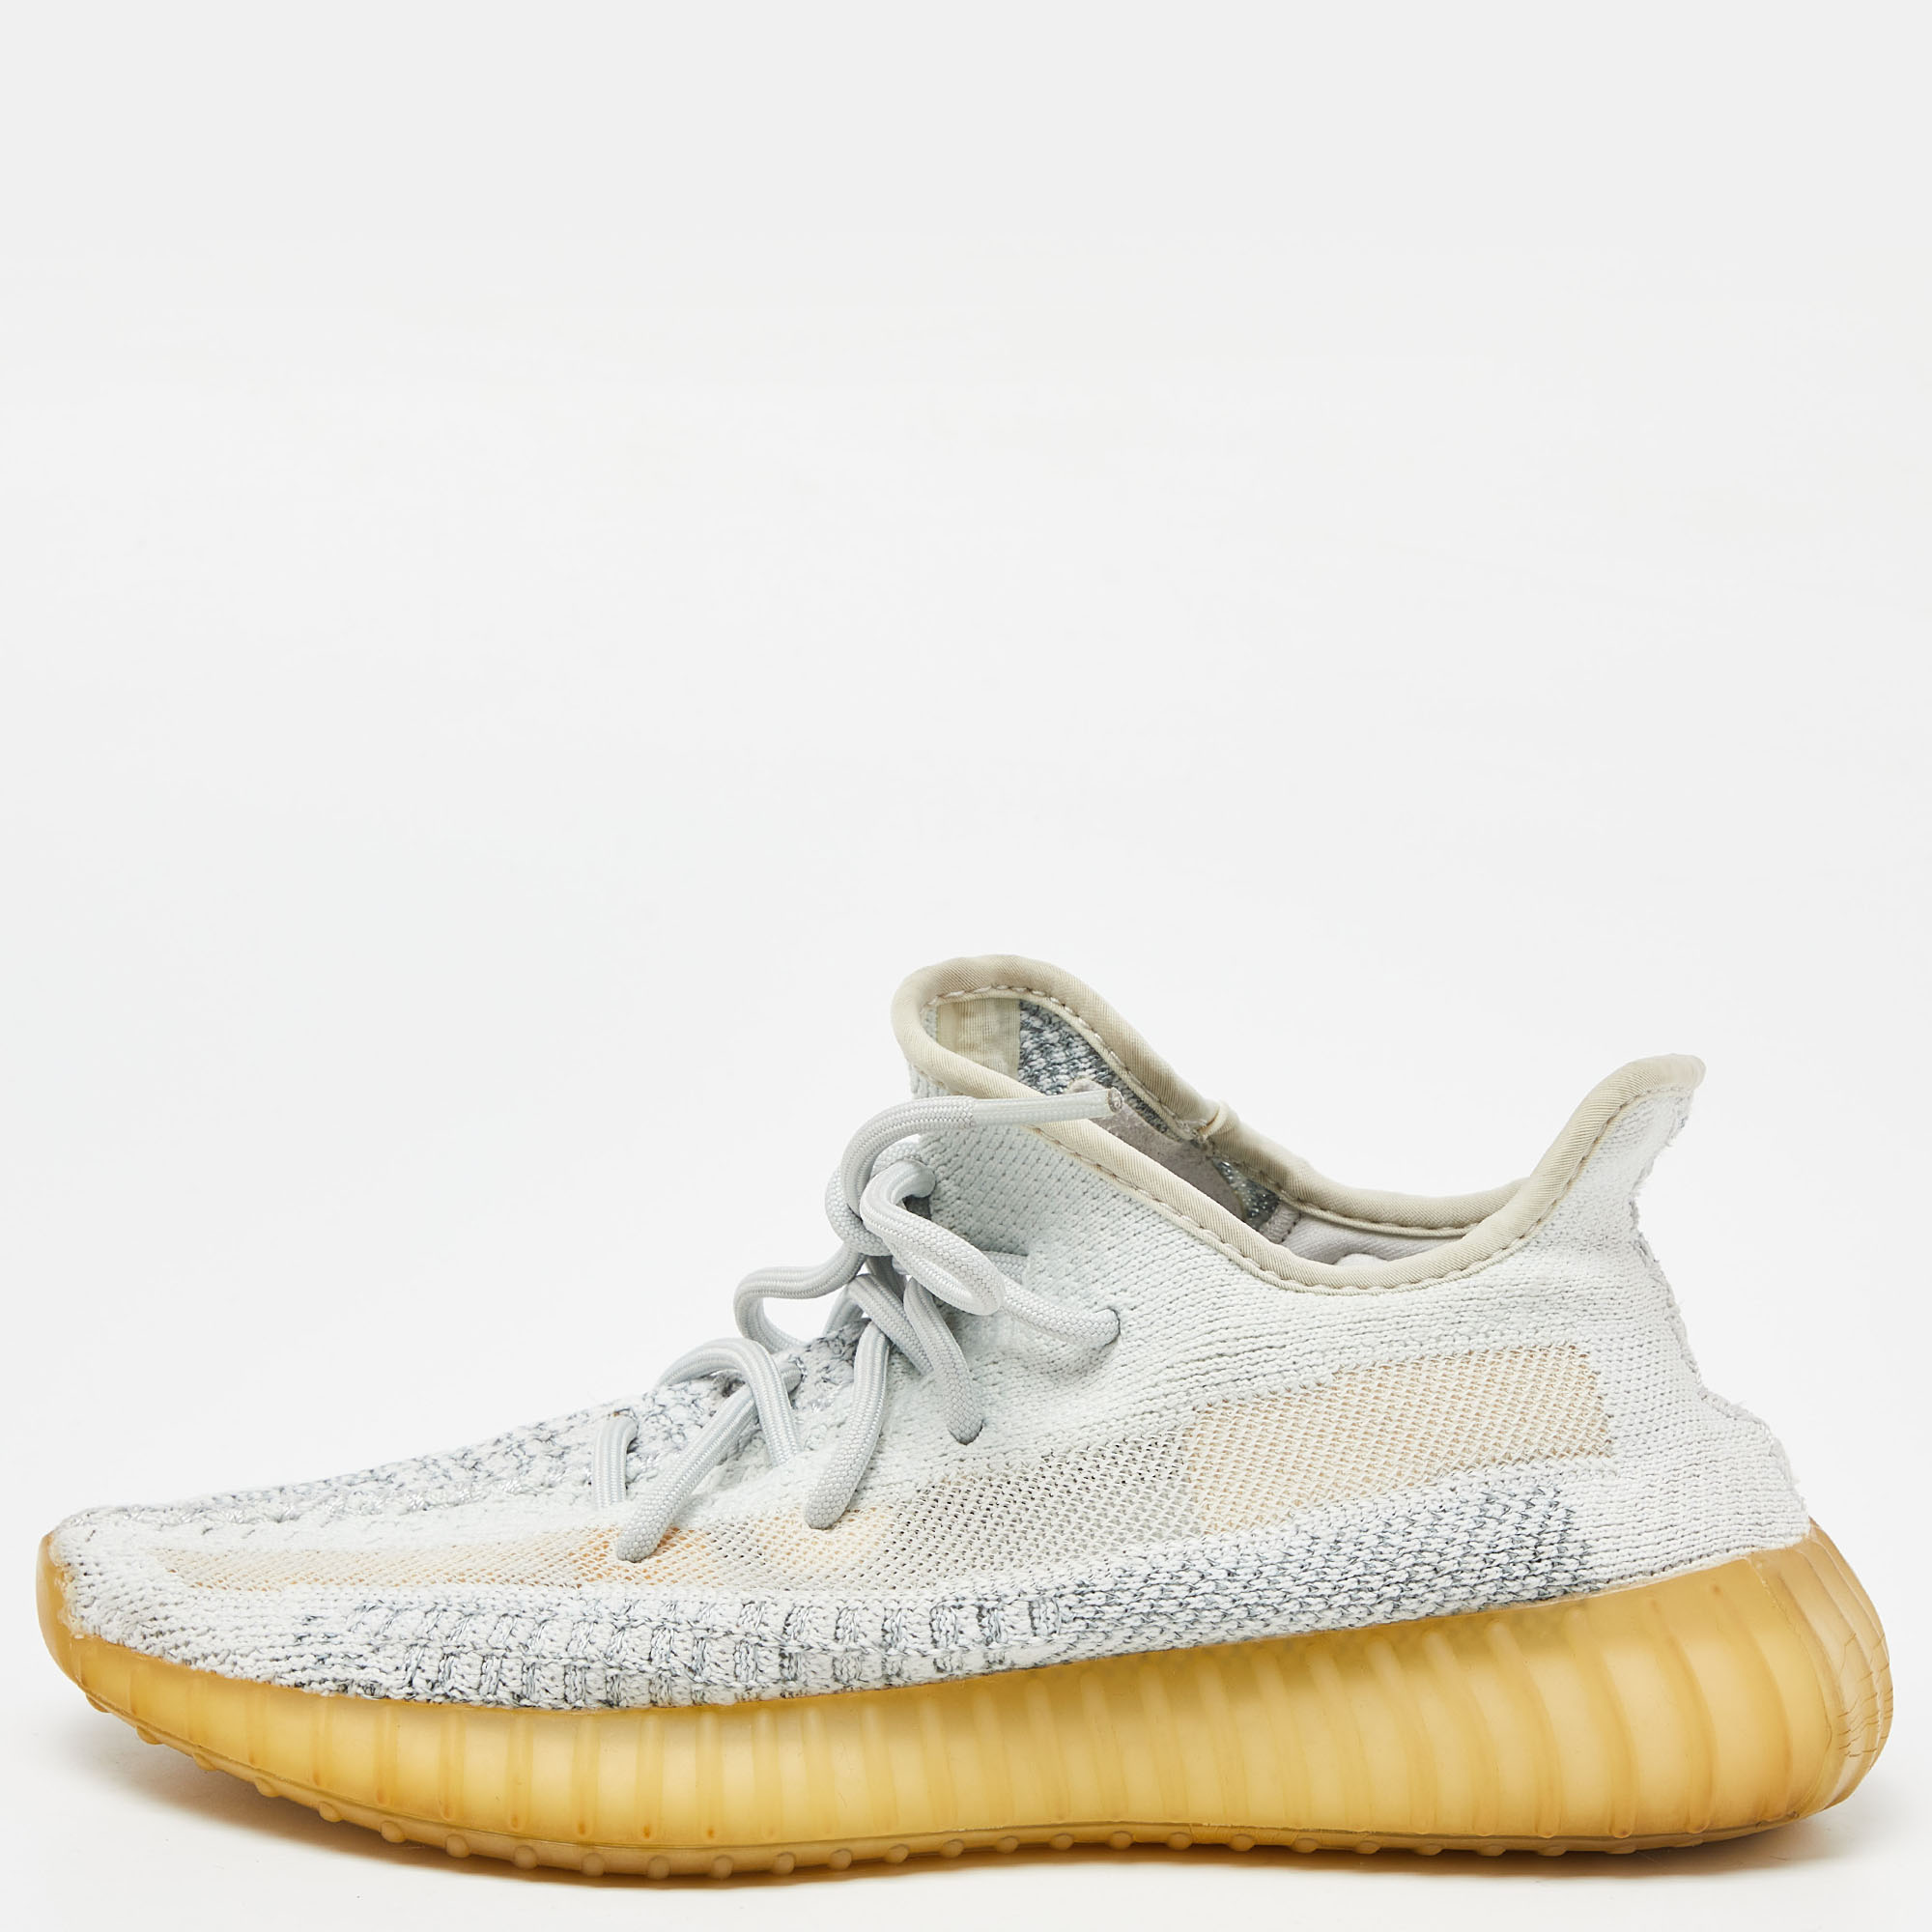 

Yeezy x Adidas Blue/White Knit Fabric Boost 350 V2 Cloud White Reflective Sneakers Size 39 1/3